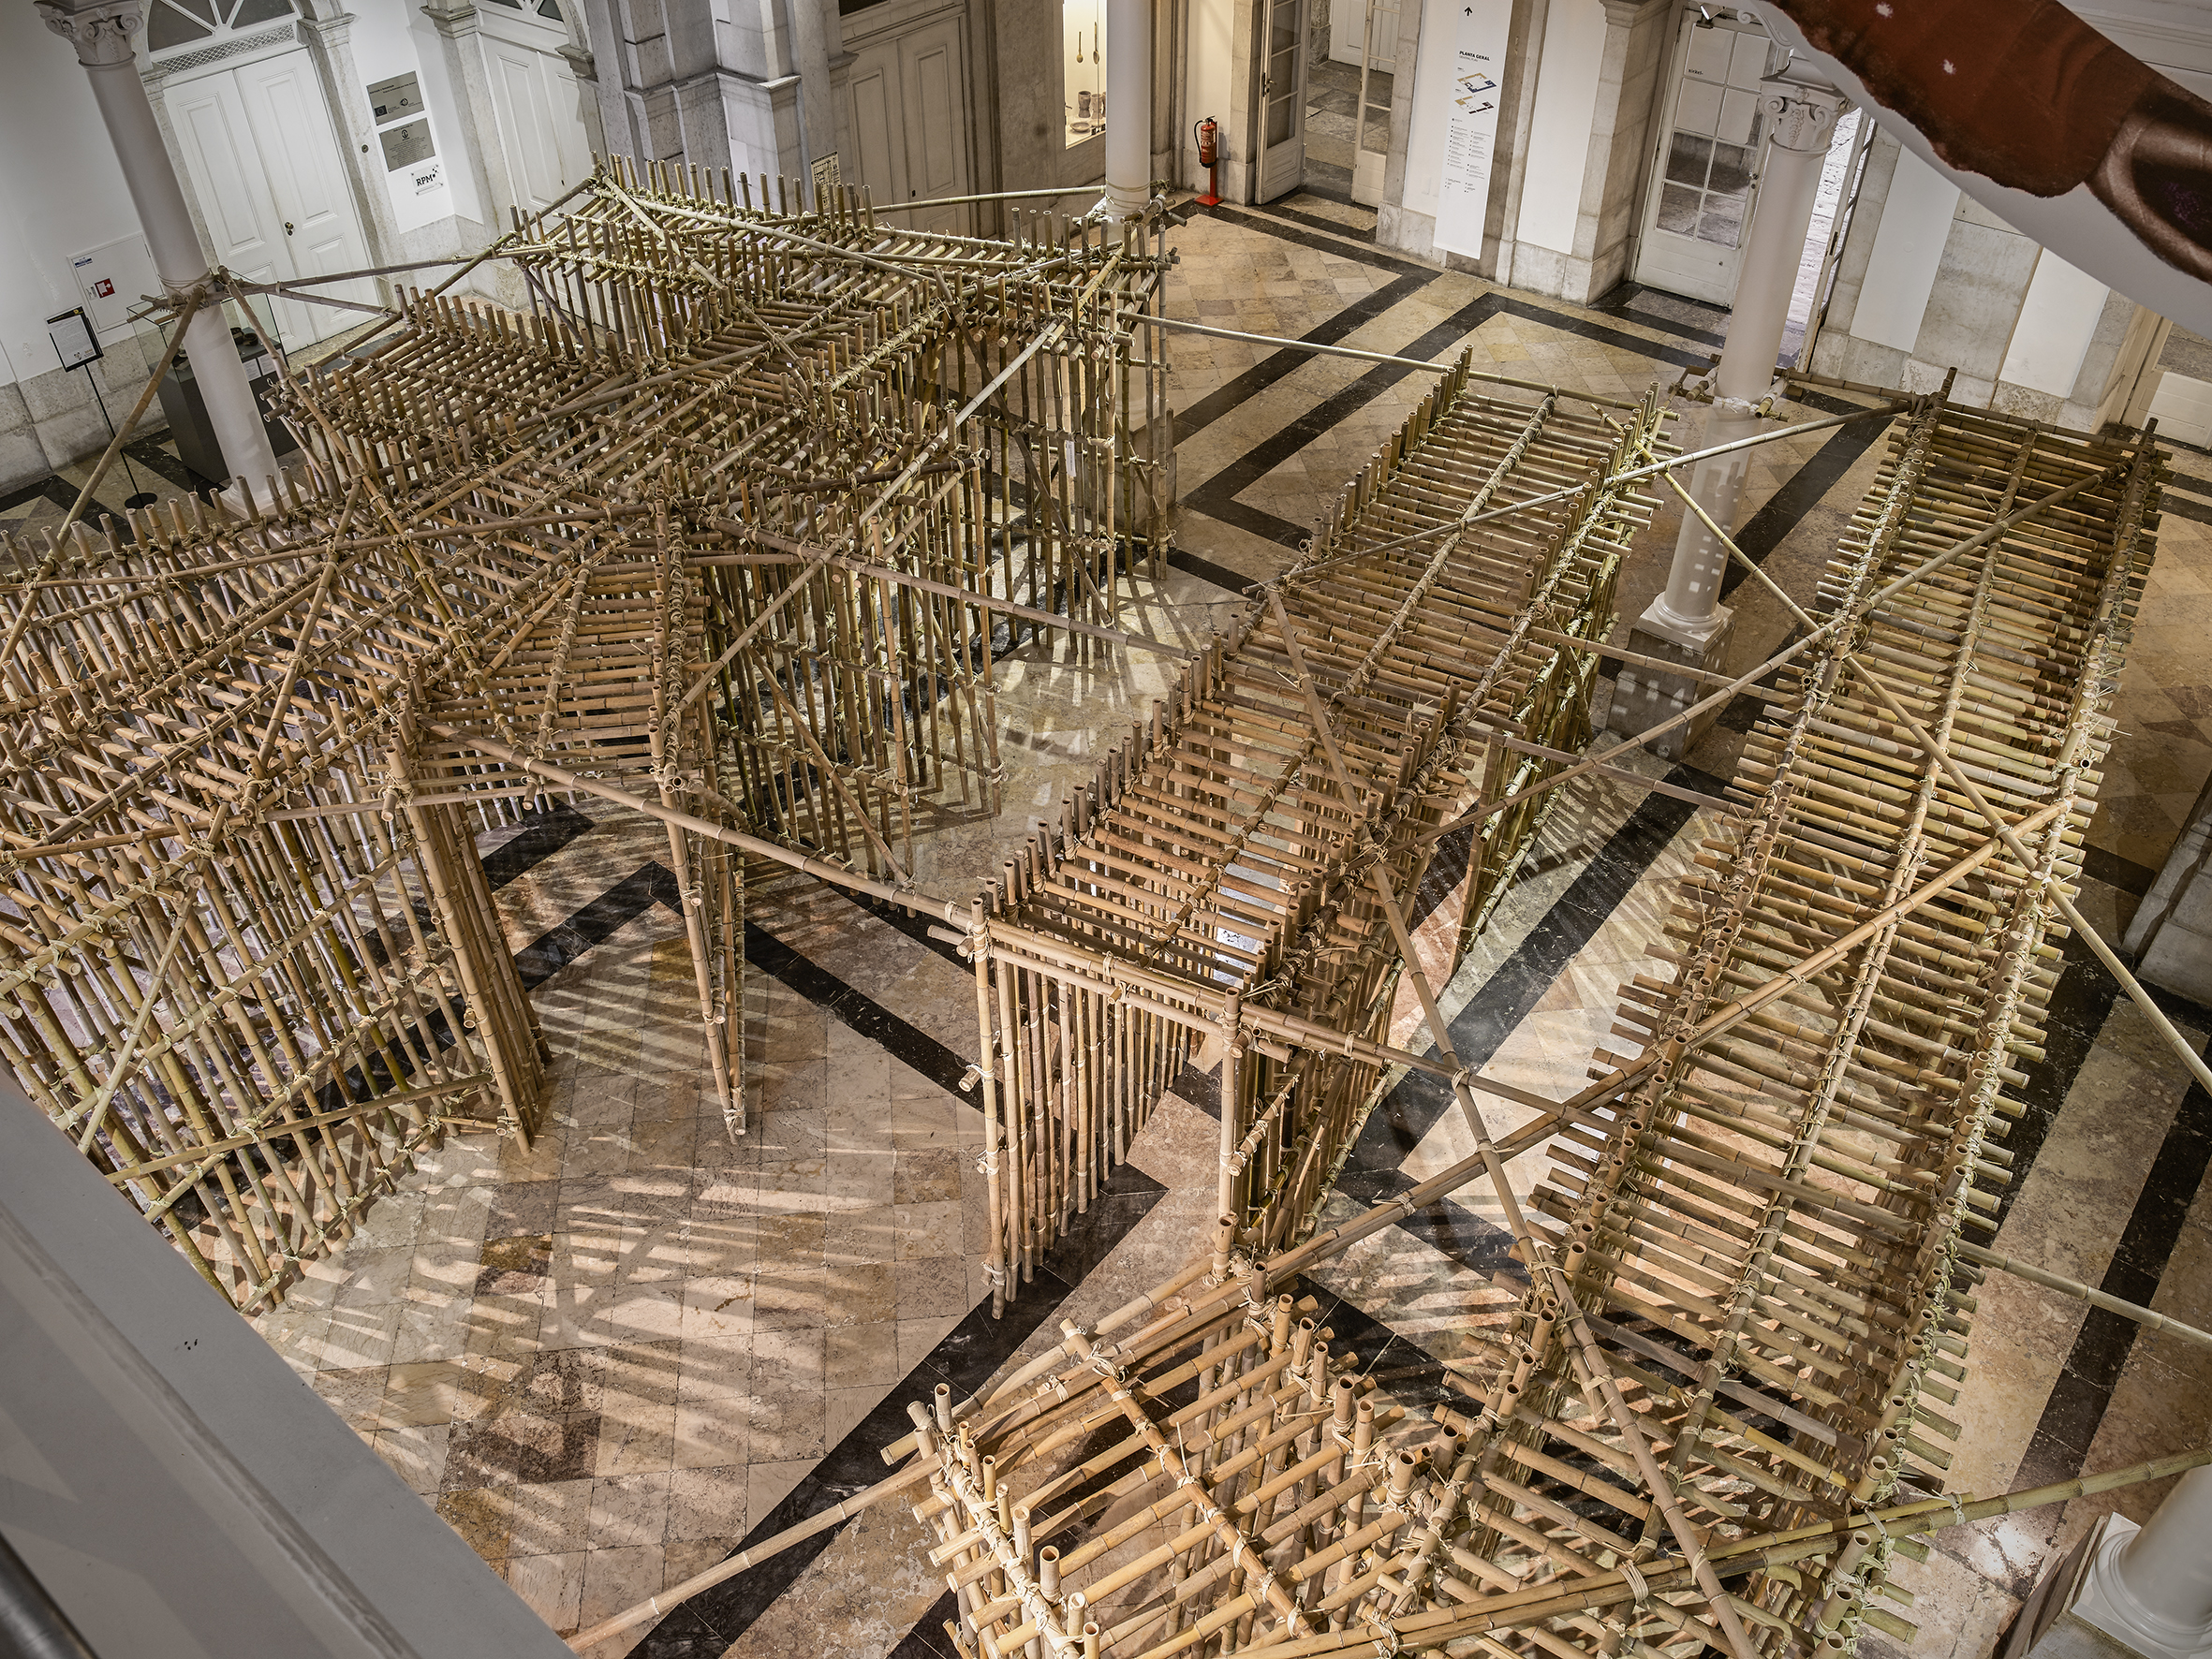 Temporary bamboo installations or “ephemeral structures,”